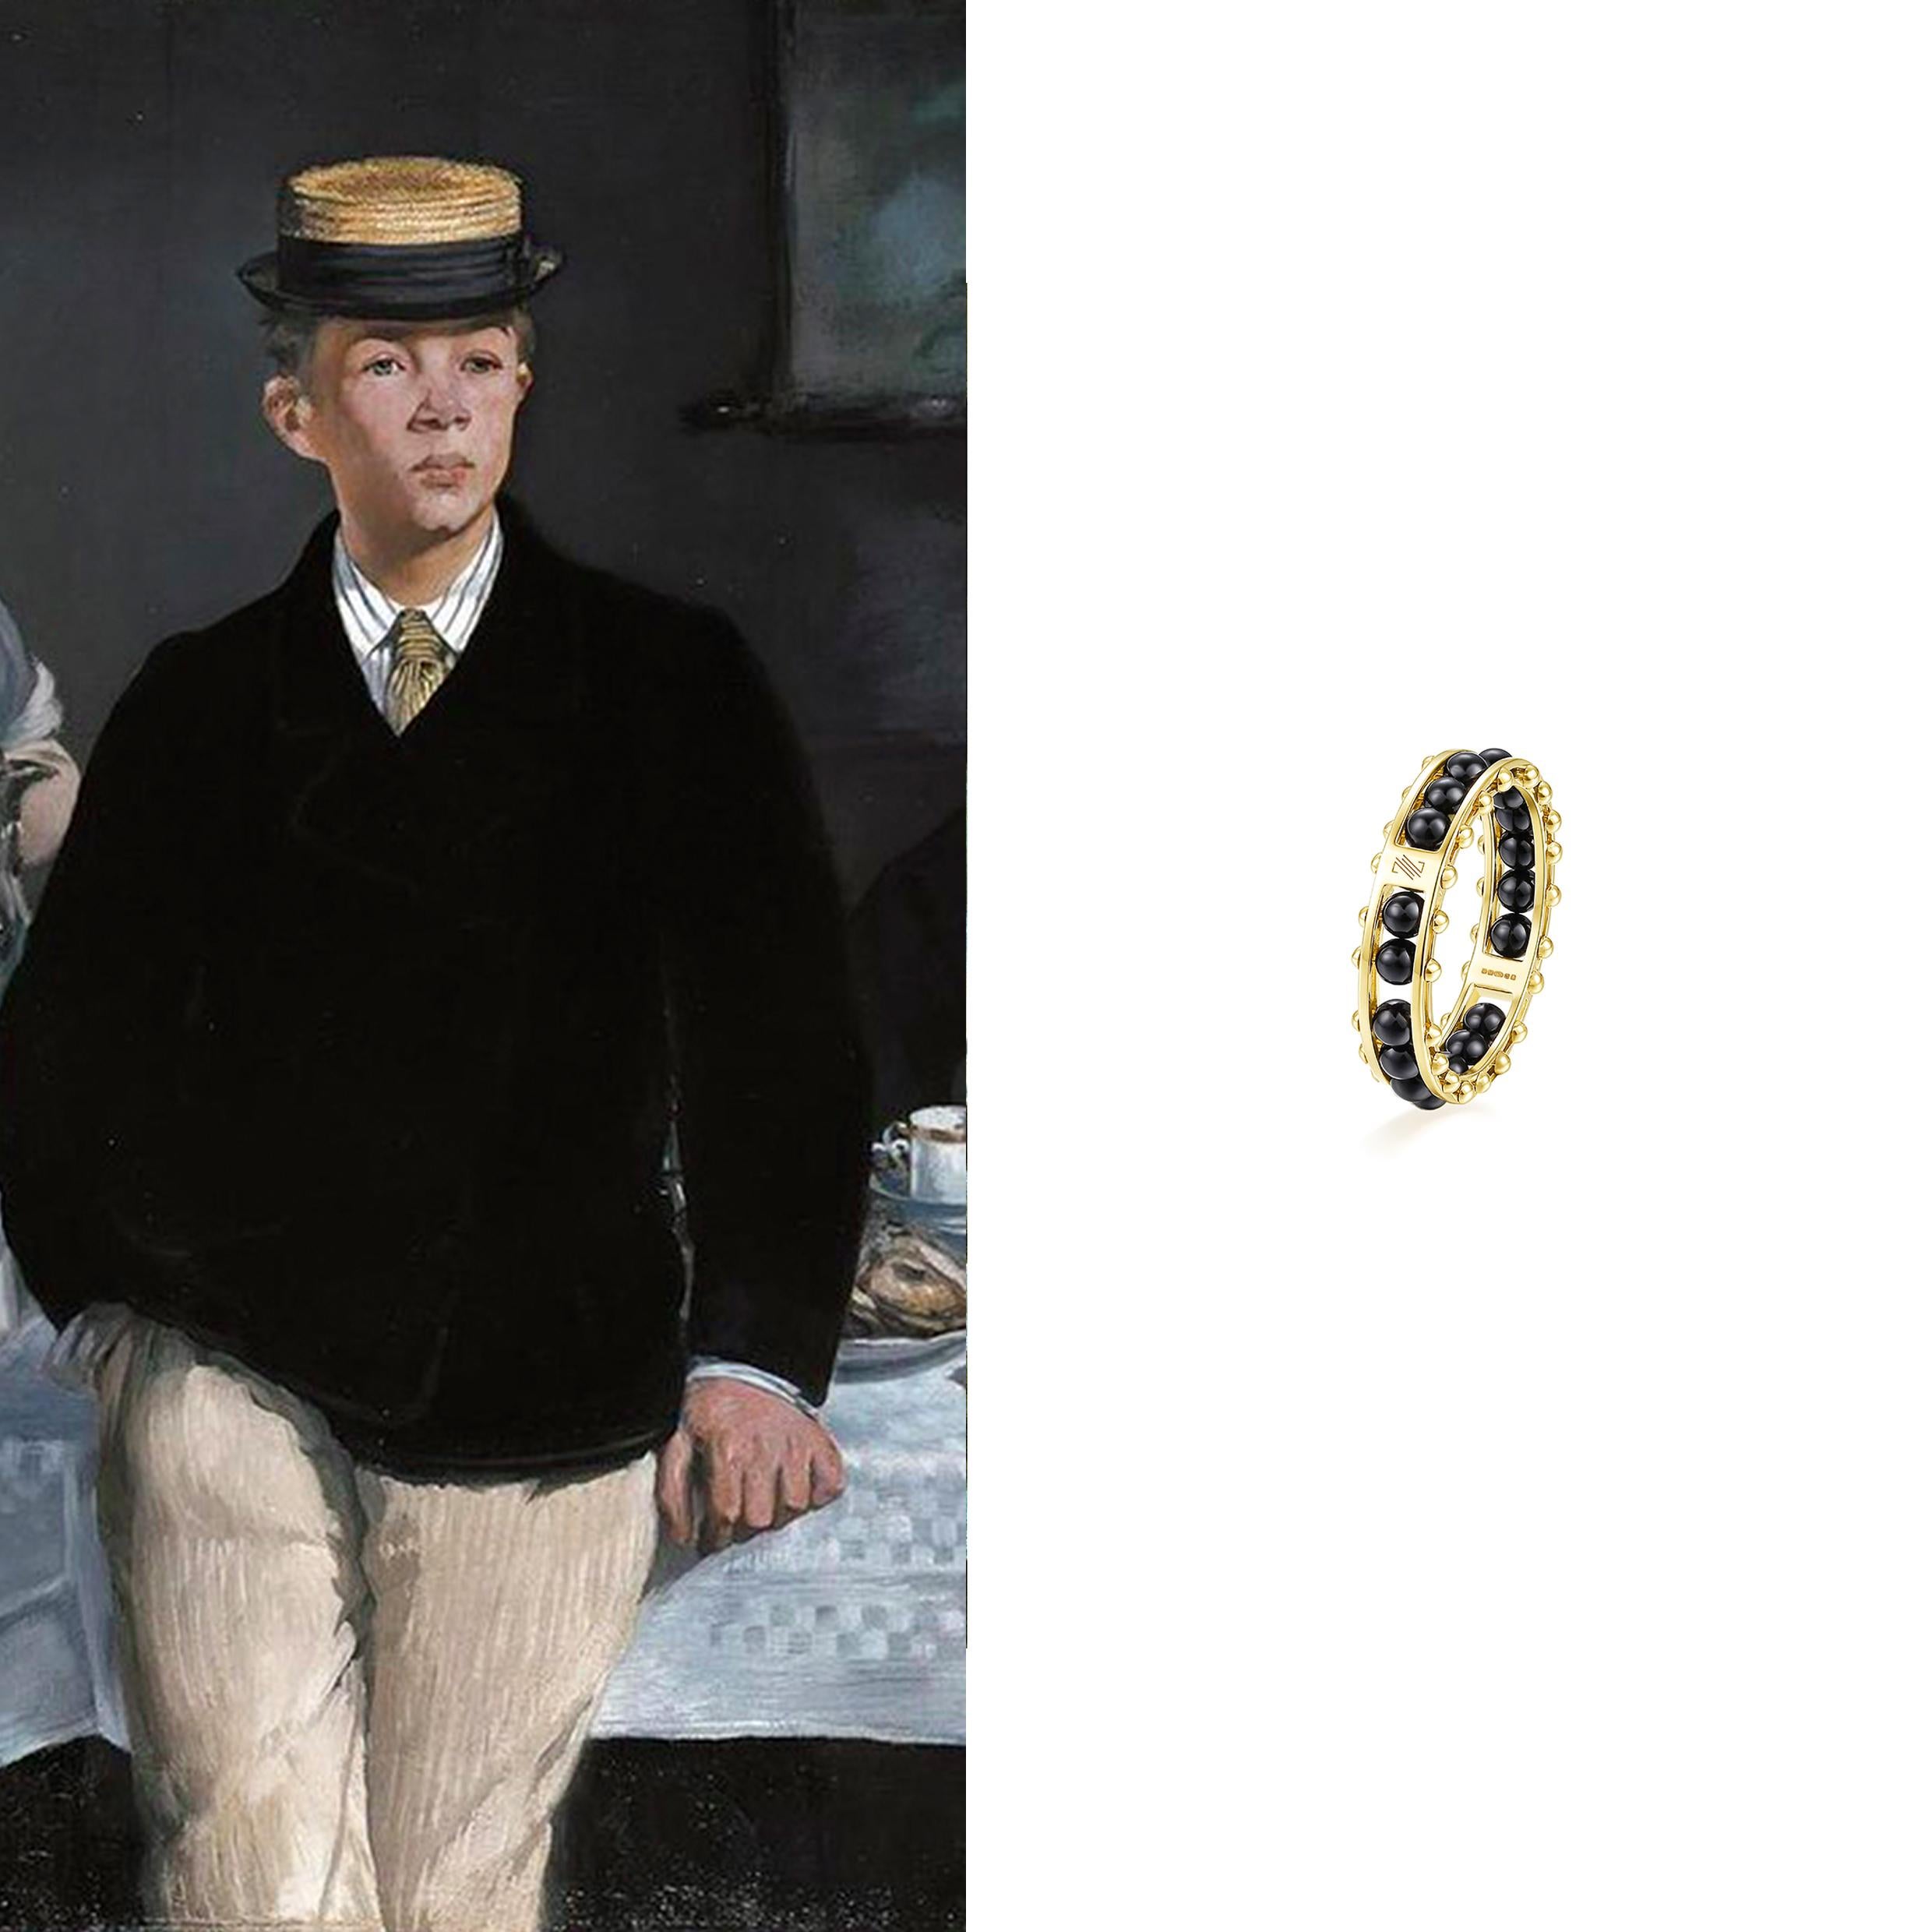 This beautifully crafted ring features hand selected Black Onyx beads set in 18k Yellow Gold. The gems are chosen for their quality and colour to best echo those hues in Édouard Manet's painting ‘Le Déjeuner dans l'atelier (Luncheon in the Studio)’.